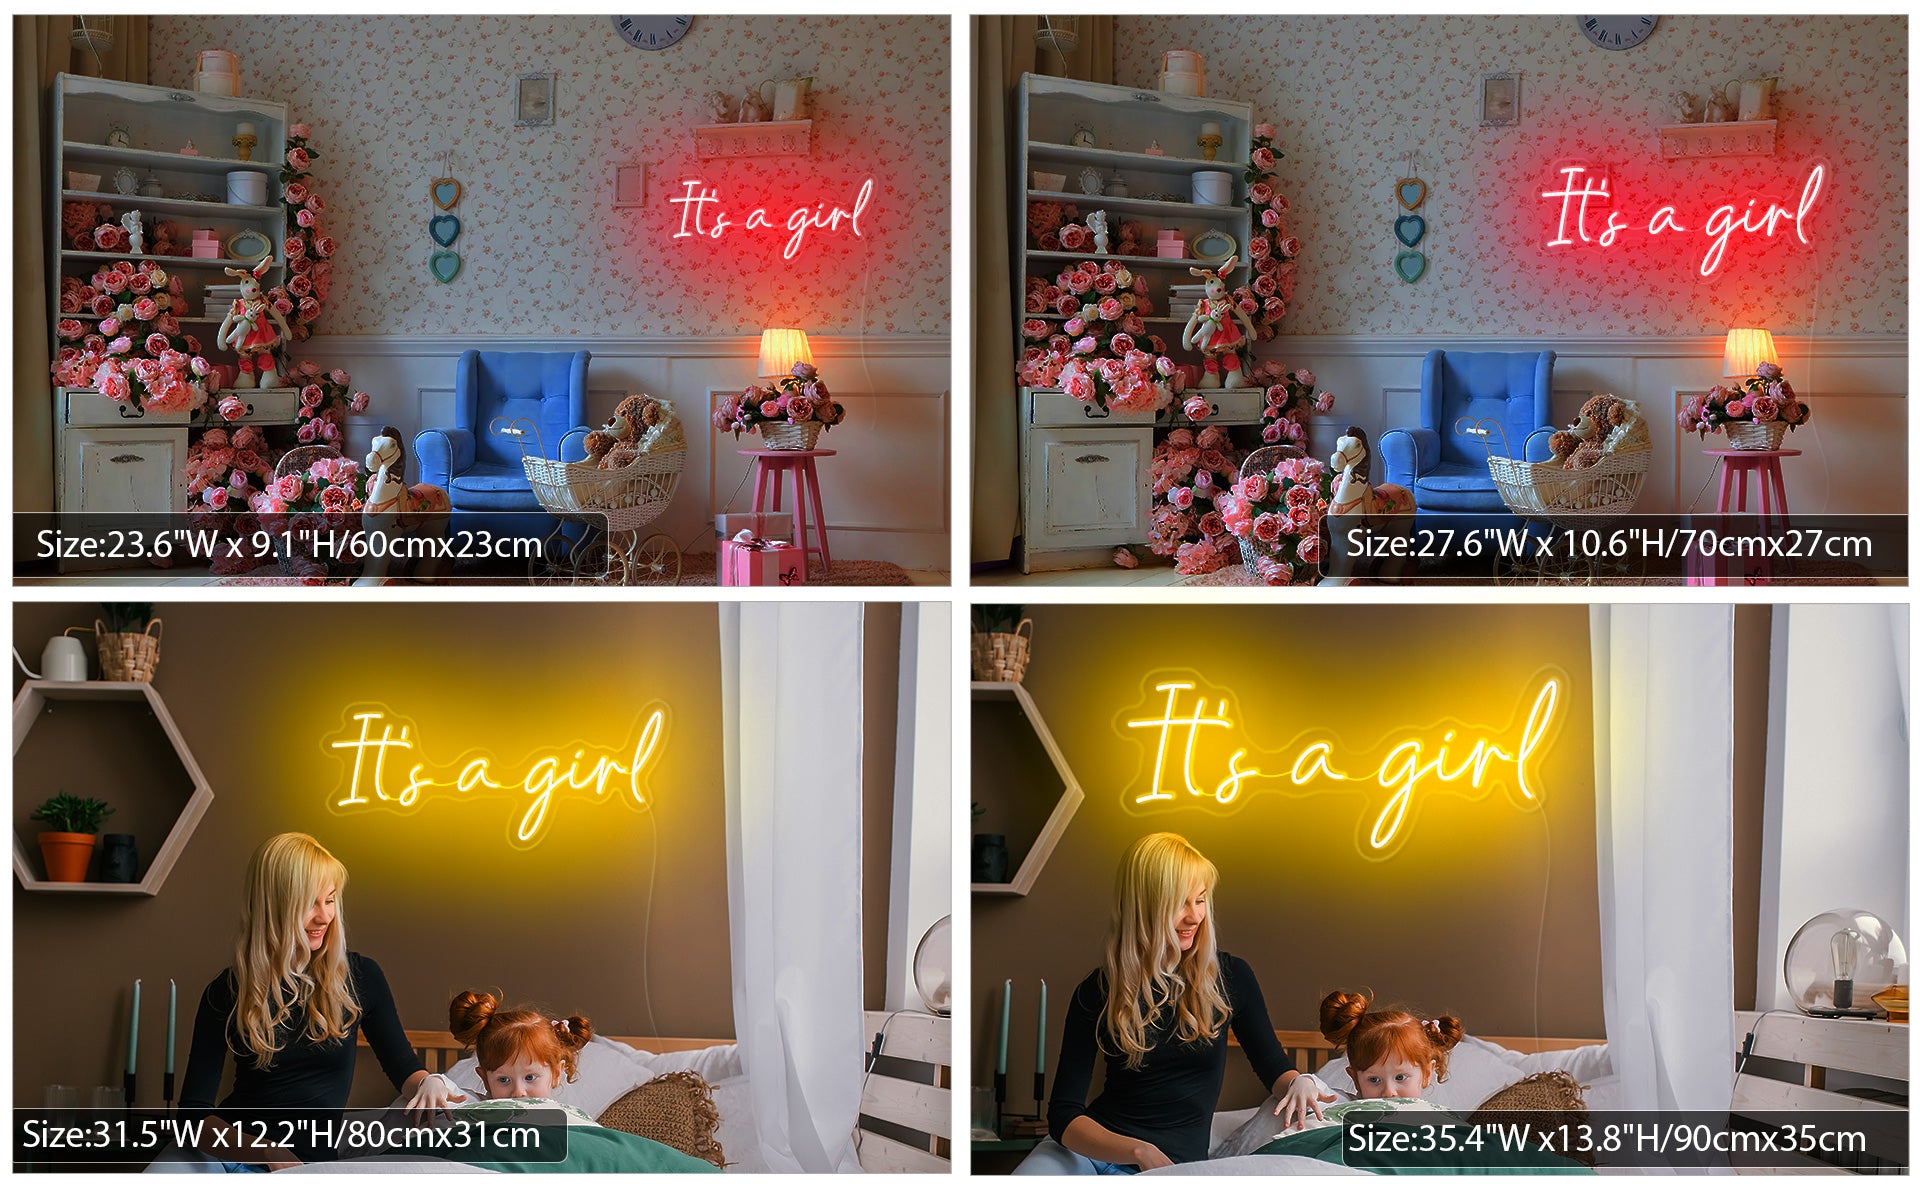 It's a girl neon sign for kidsroom